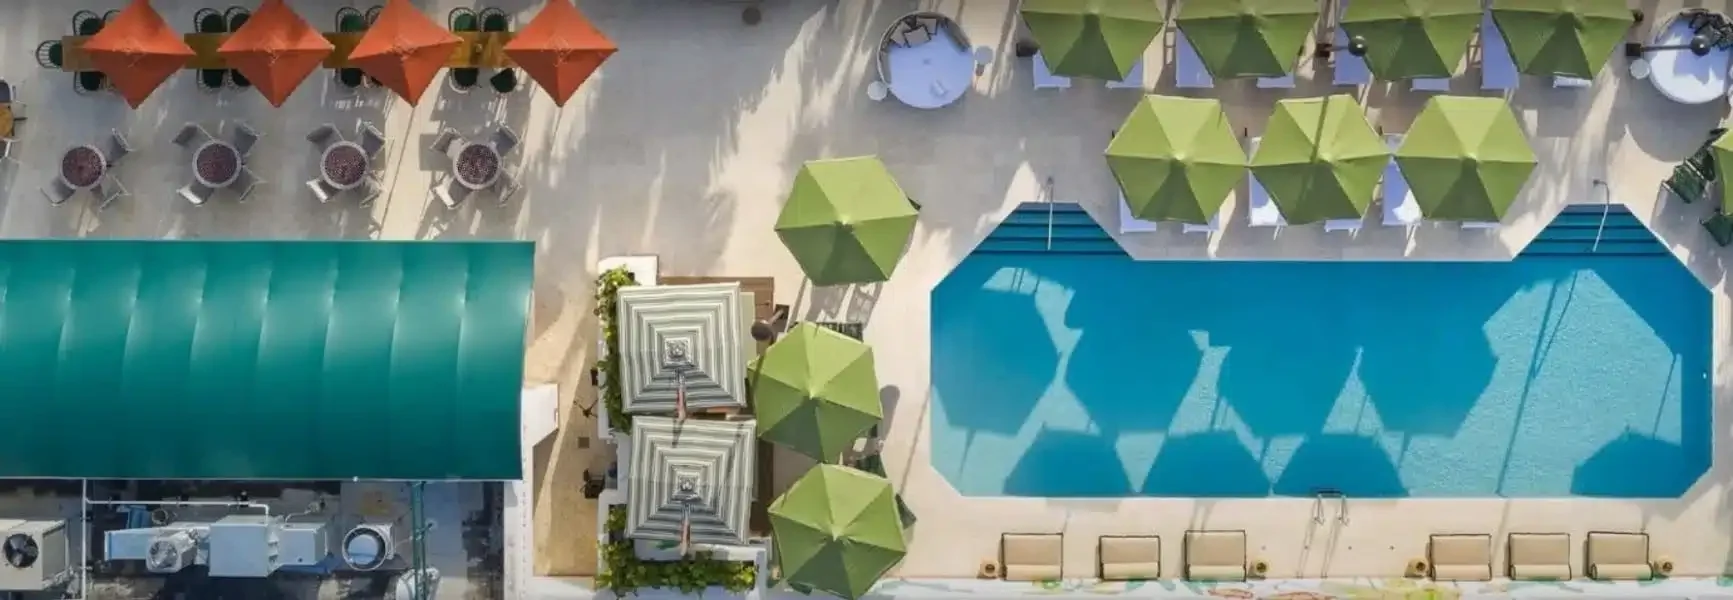 A bird's eye view of a pool and beach umbrellas in bright green and orange colors.